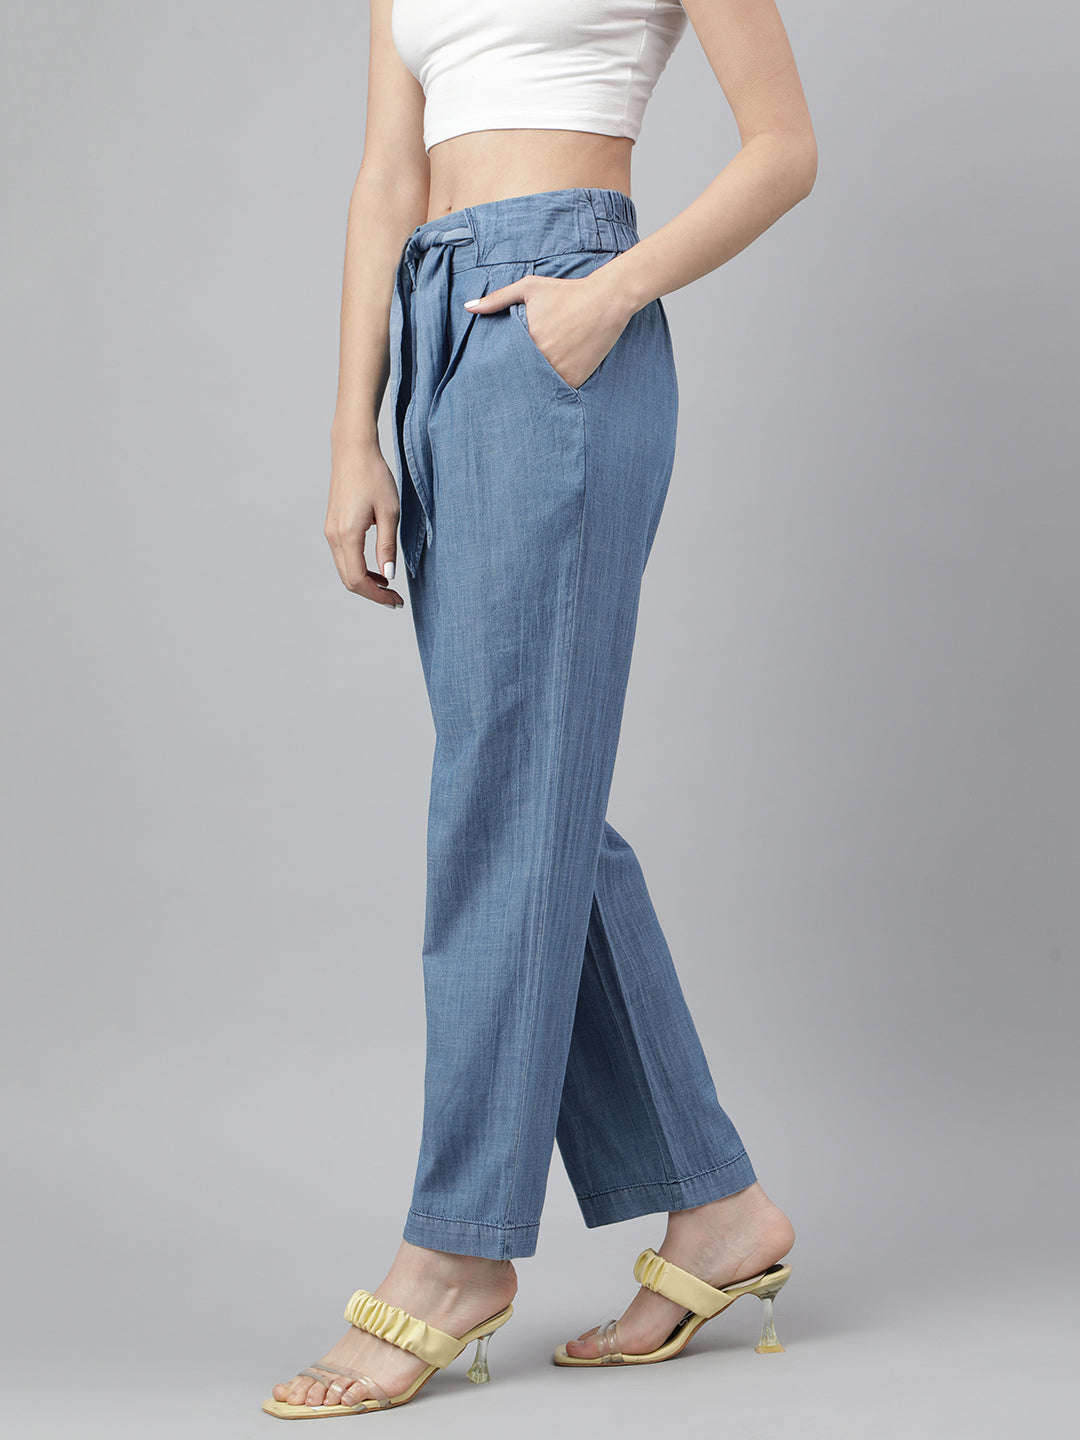 Blue Solid Straight Pant for Women Casual Wear